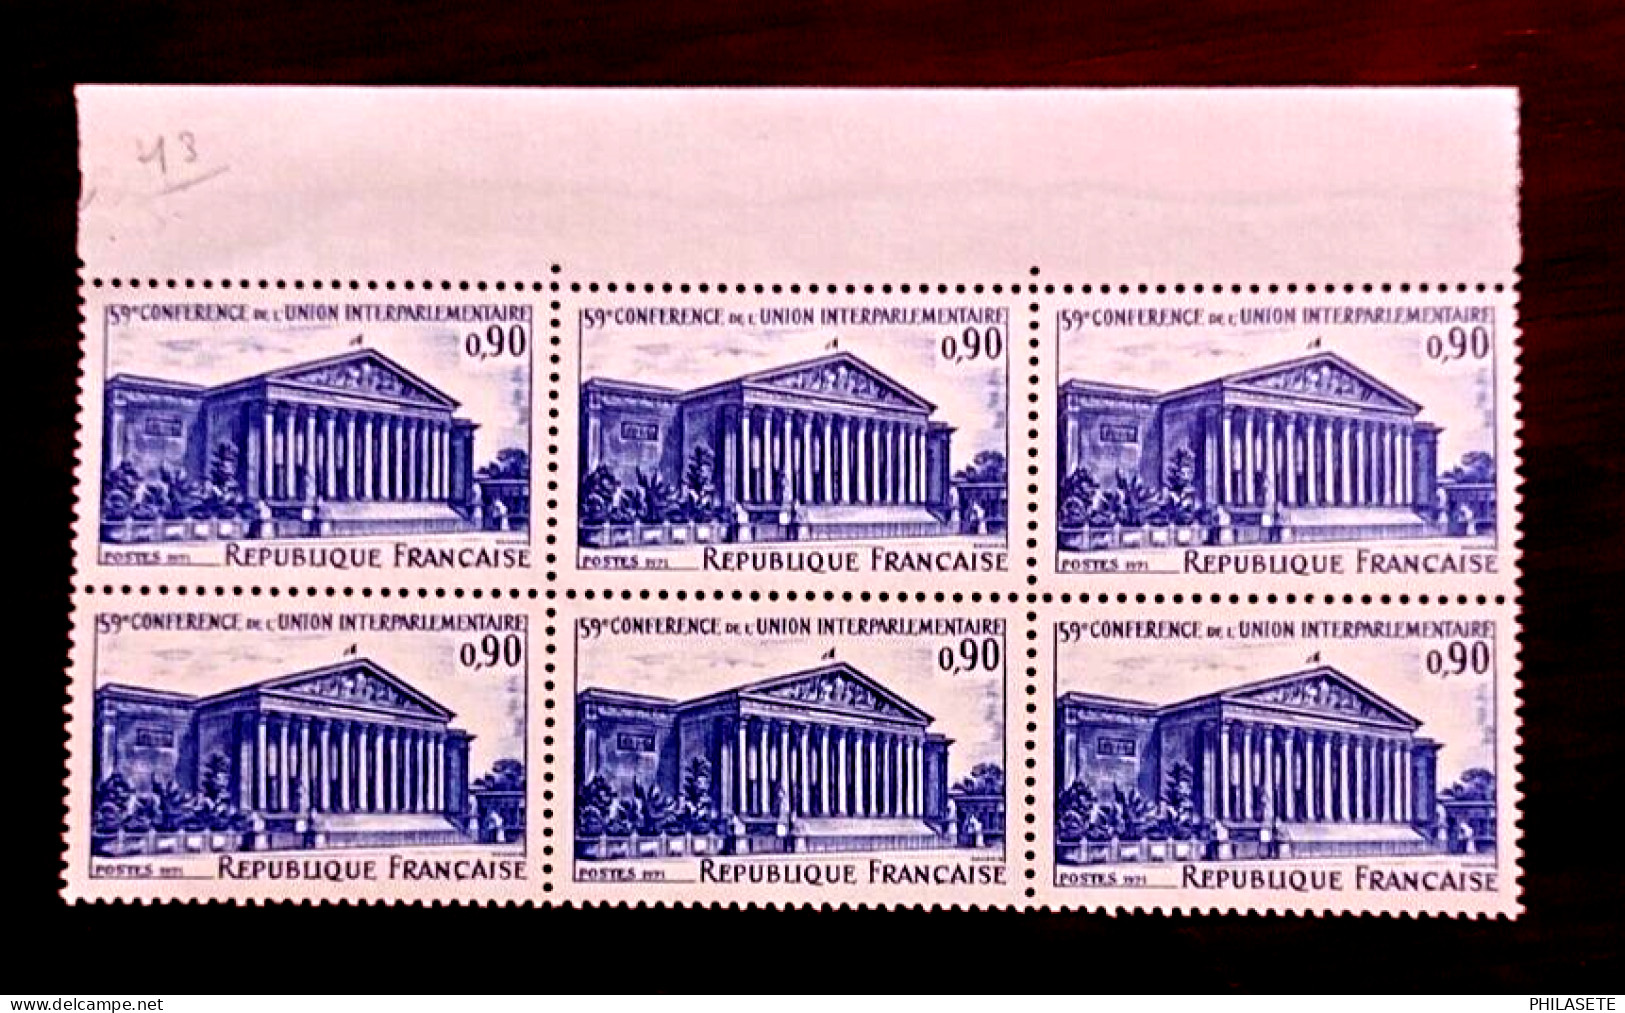 France 1971 Bloc De 6 Timbres Neuf** YV N° 1588 Conférence Interparlementaire - Feuilles Complètes